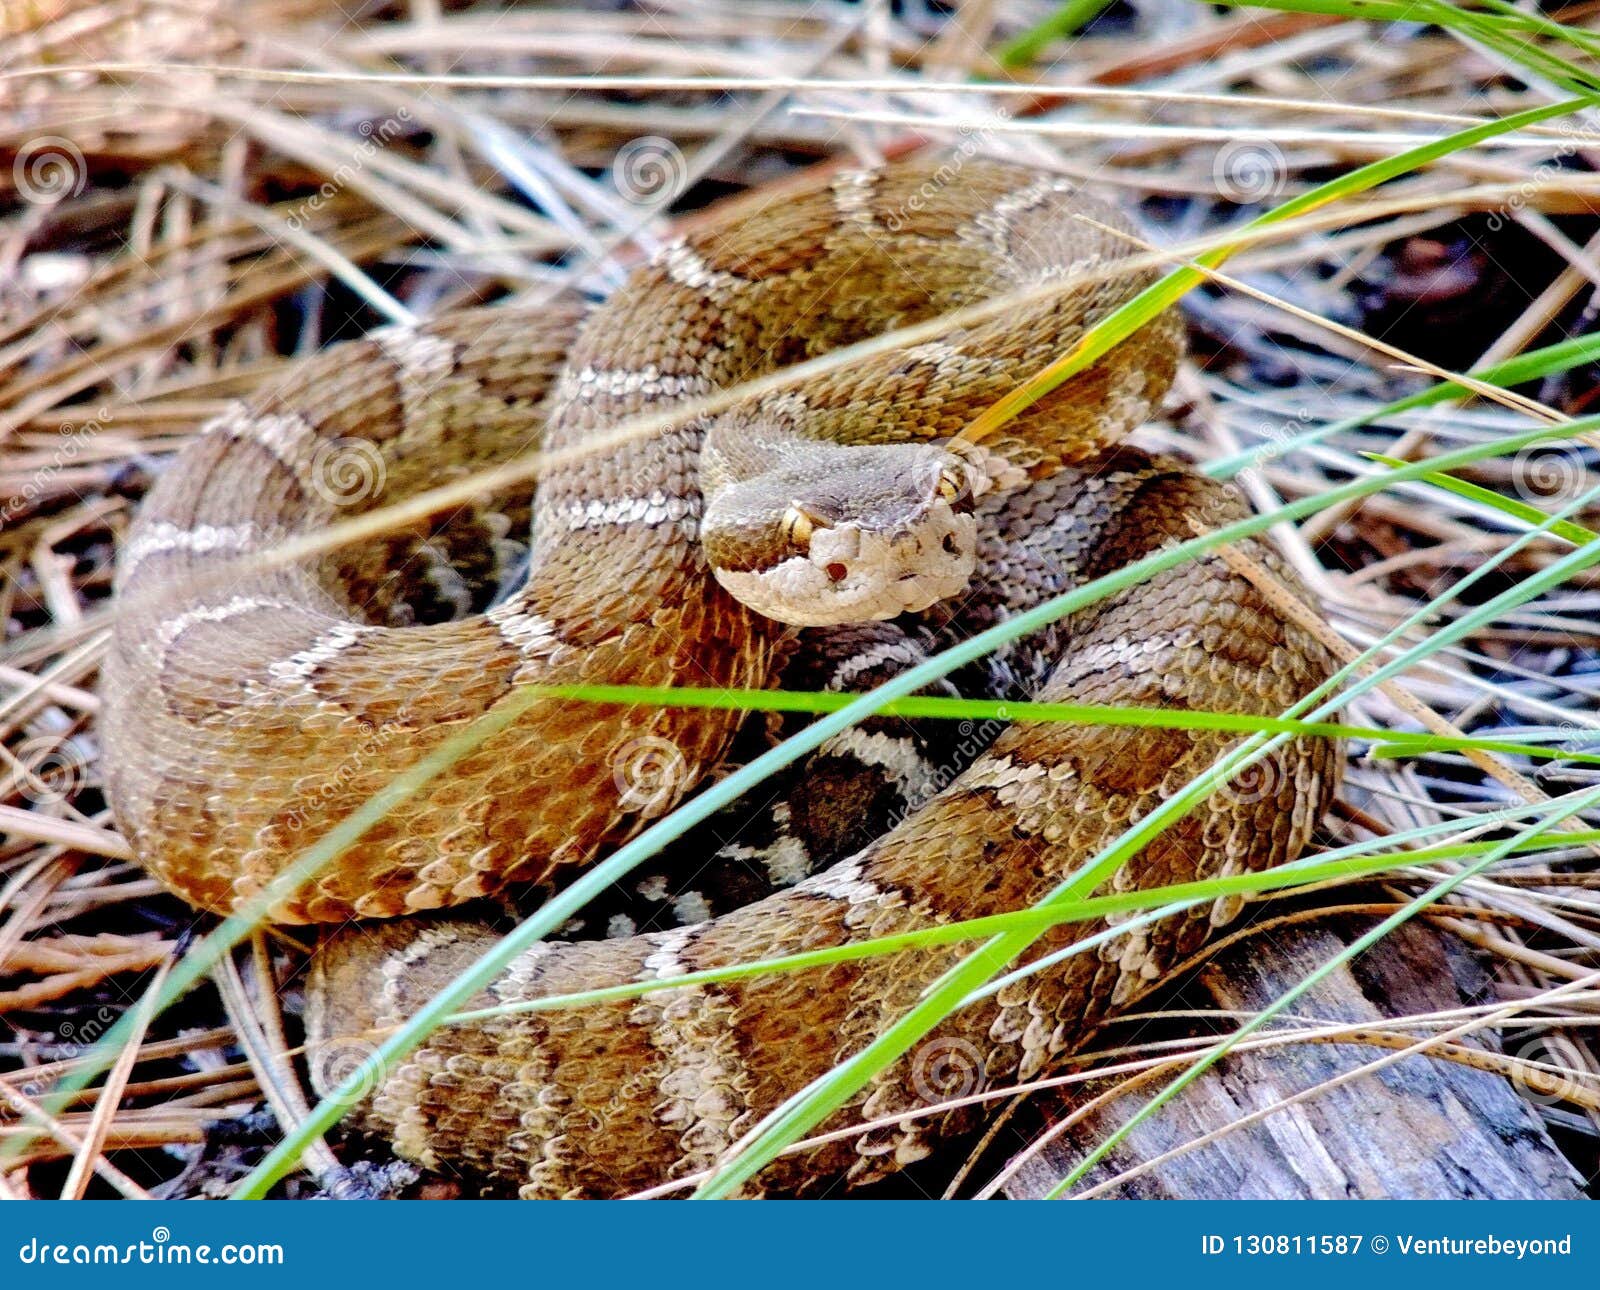 coiled northern pacific rattlesnake, castella, california, usa